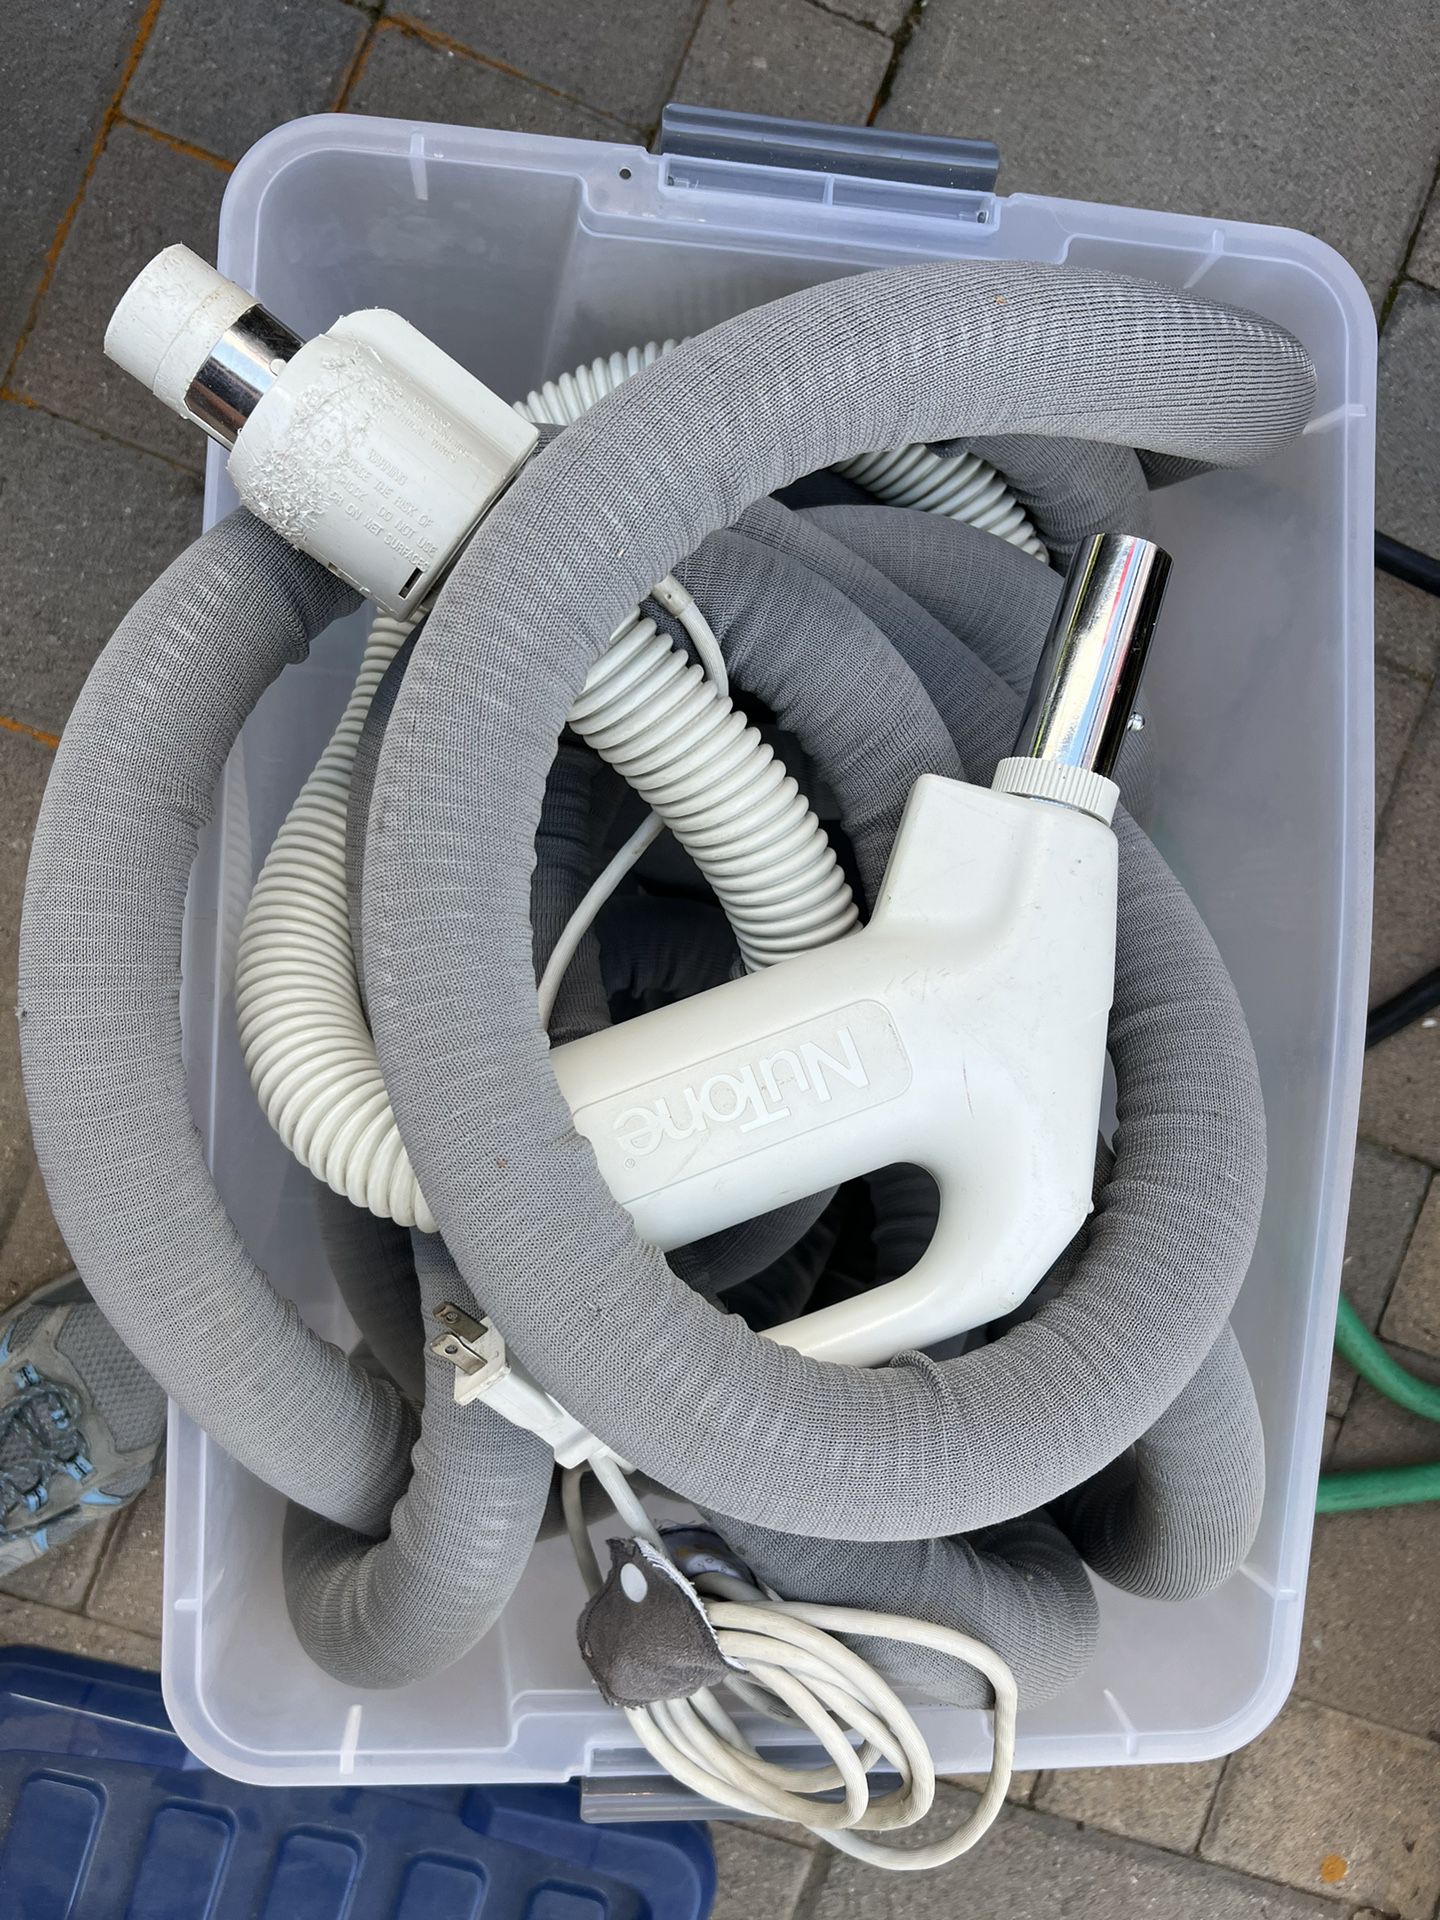 Nutone Central Vacuum Powered Hose And Power Head With Floor Attachments